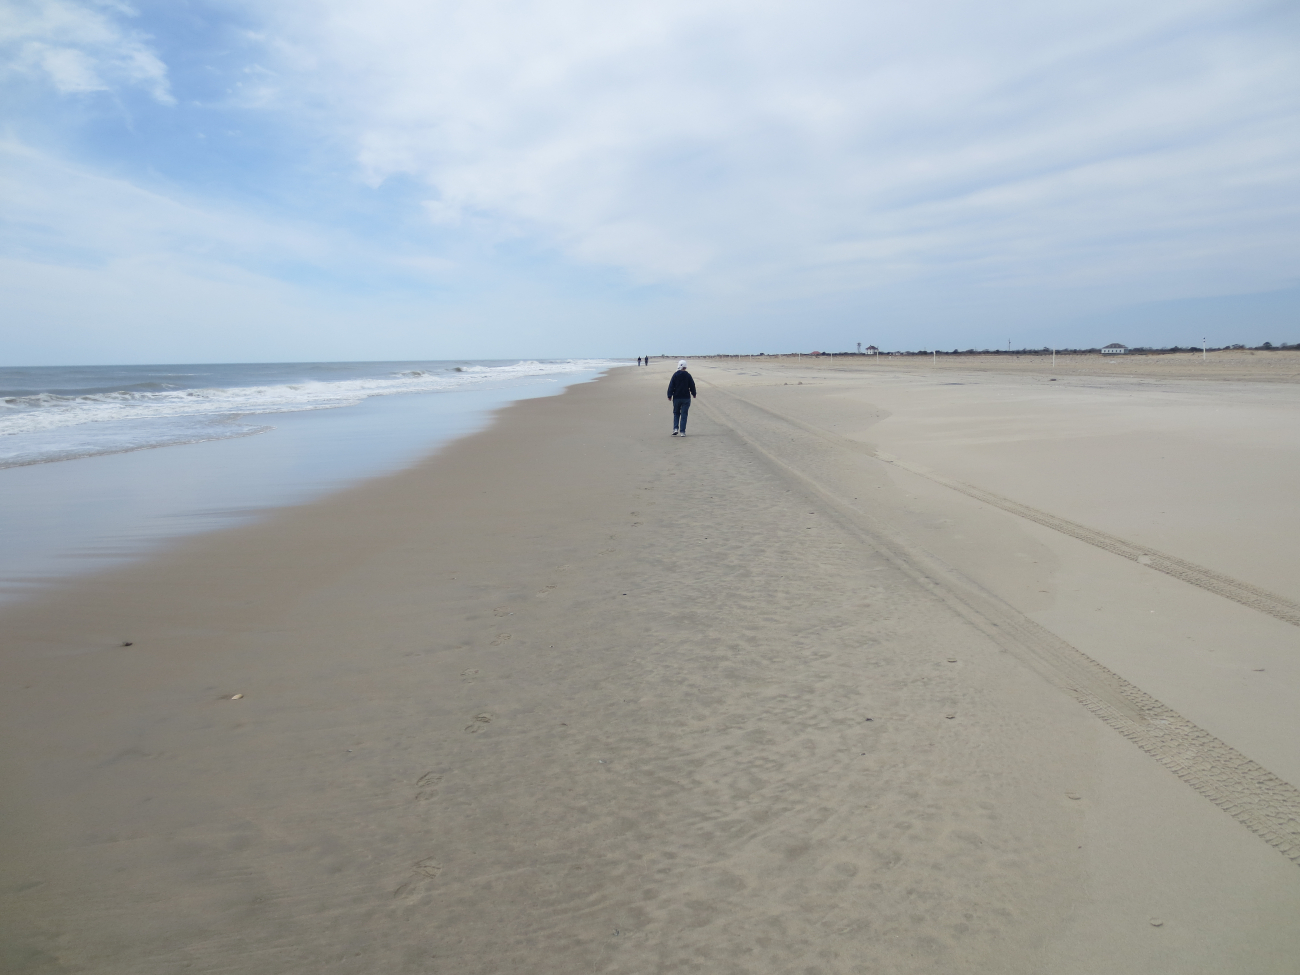 Walking to the south end of Assateague Island